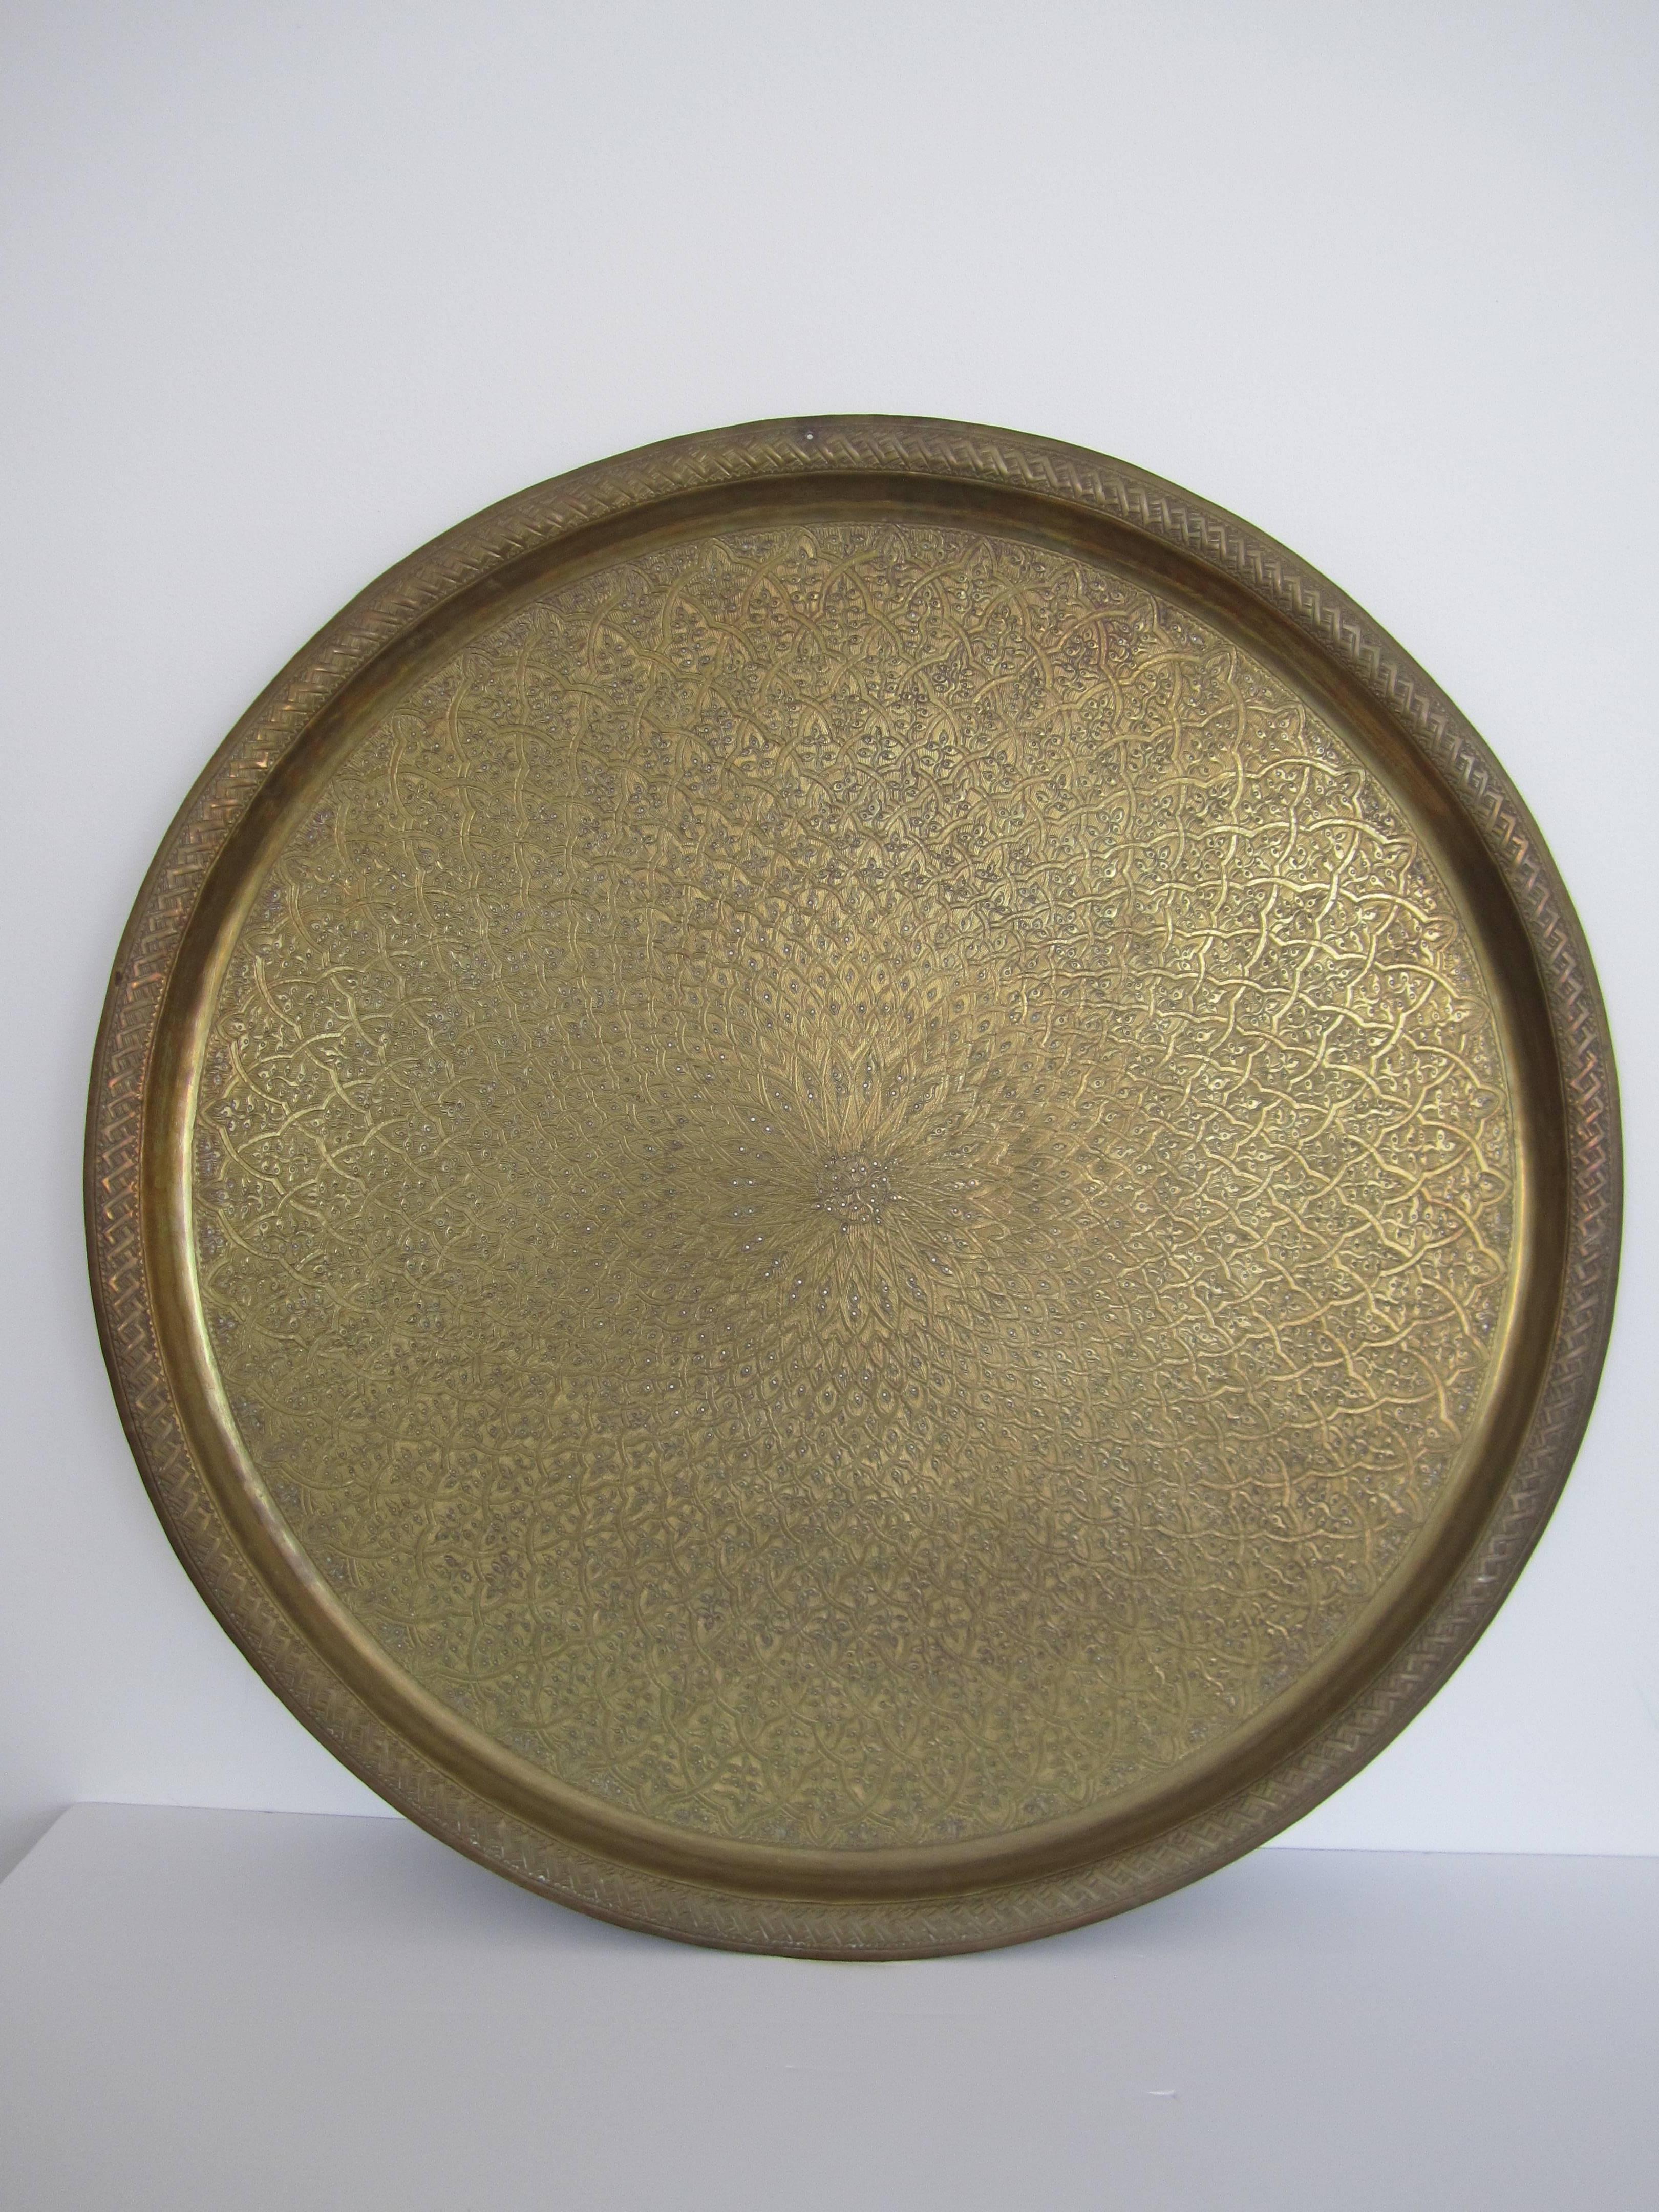 A large vintage round brass Middle Eastern serving tray with embossed decorative design. Circa 1970s. Measurement: 26